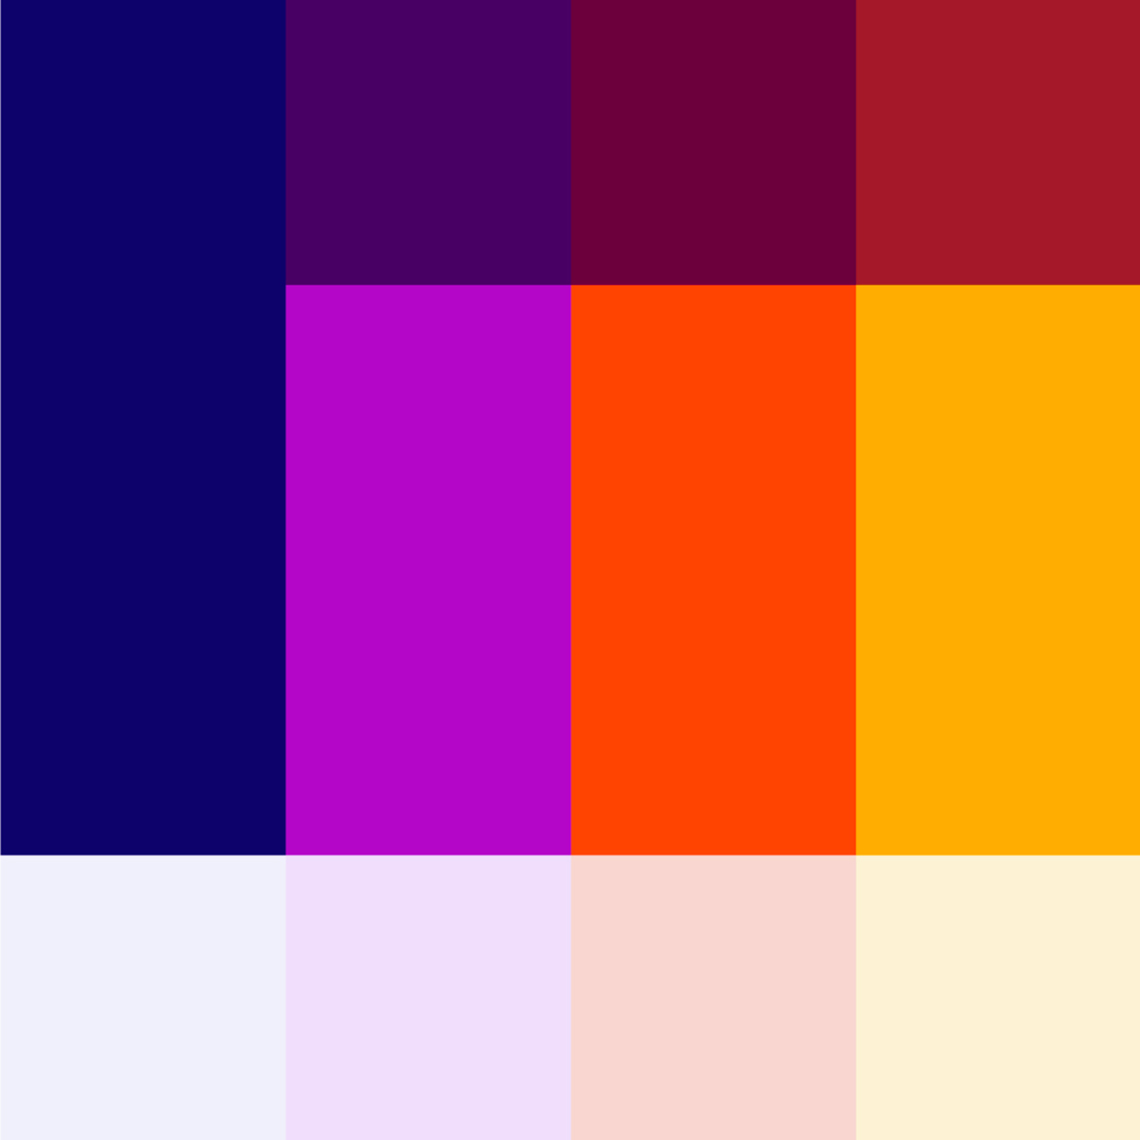 Accolite's color palette showing different shades of blue, purple, orange and yellow